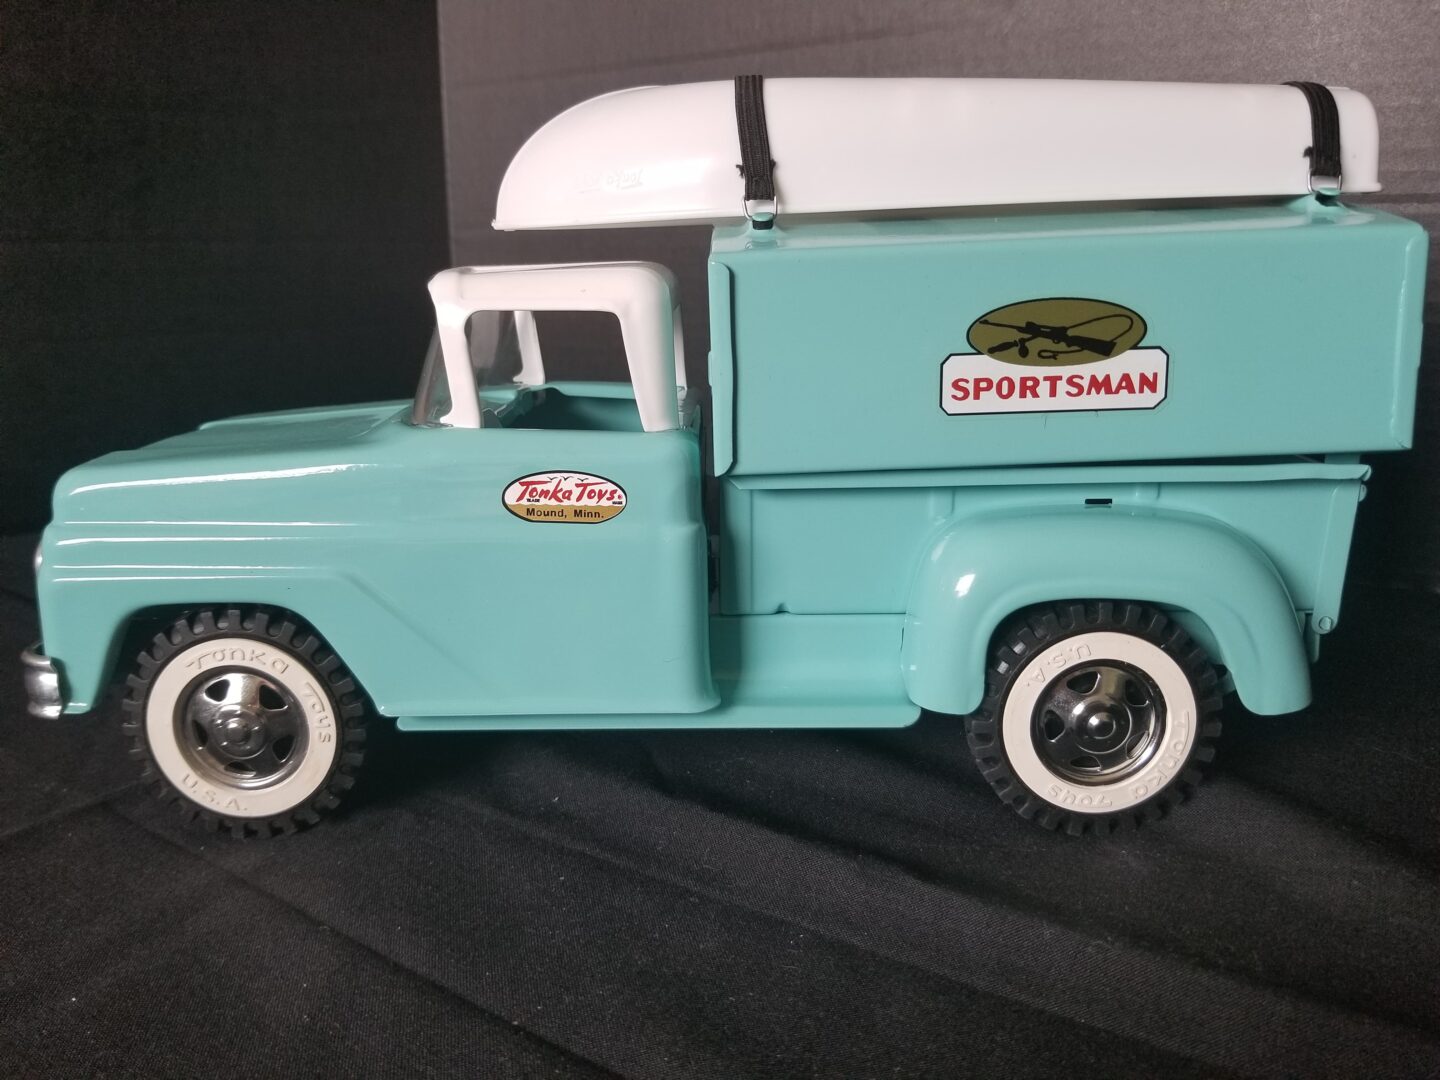 A toy truck with a surfboard on the side.